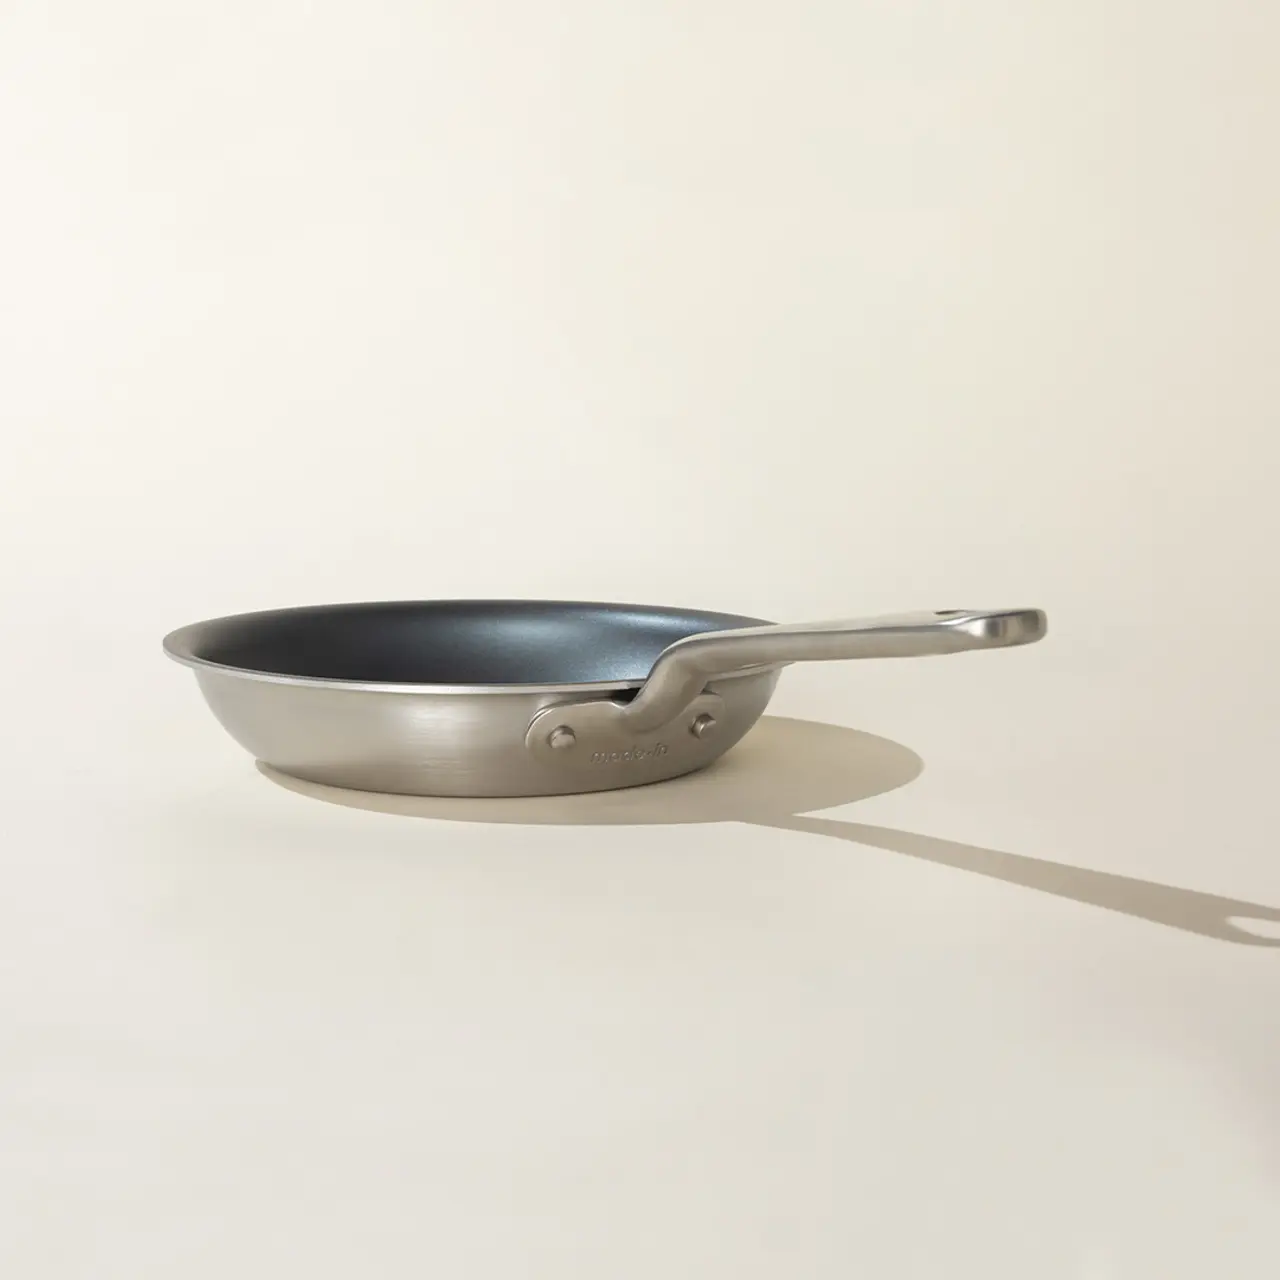 A stainless steel frying pan casts a long shadow on a light background.